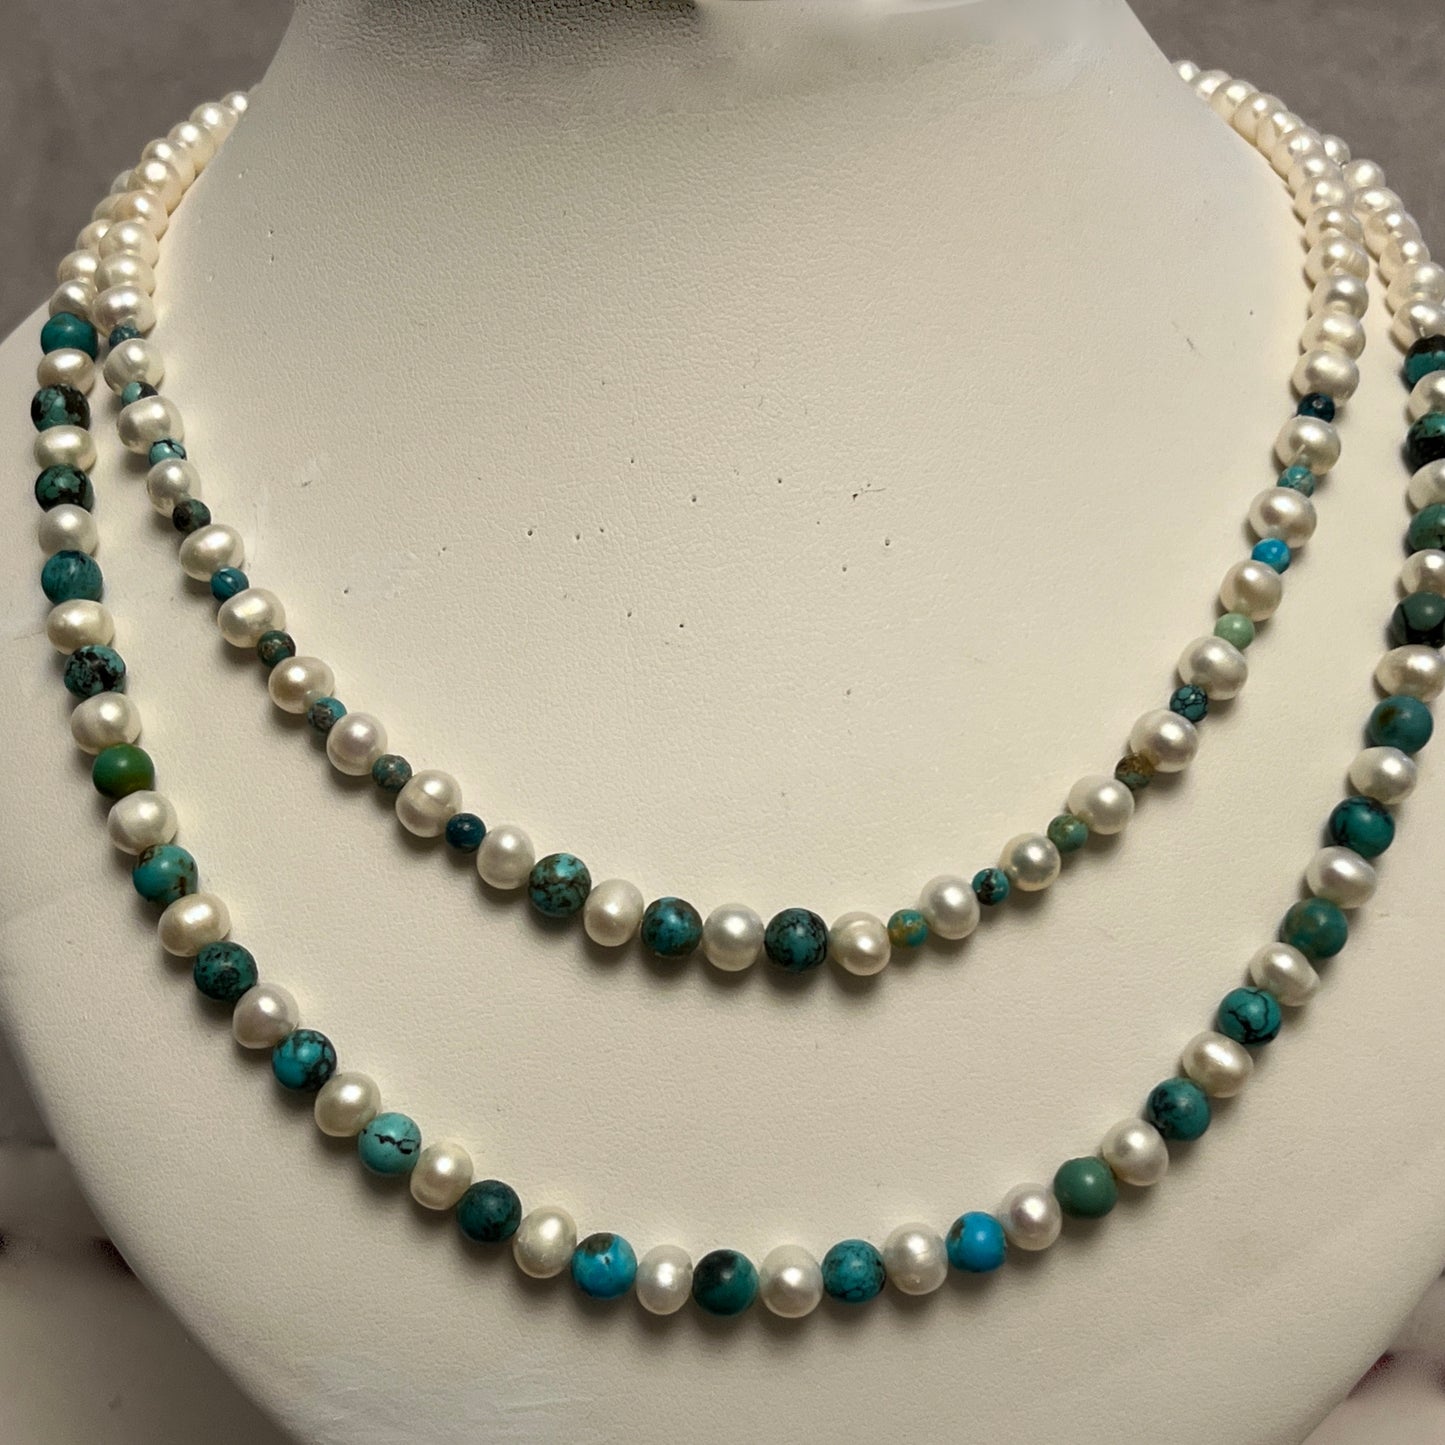 Double stranded cultured  pearl and turquoise necklace and earrings set.